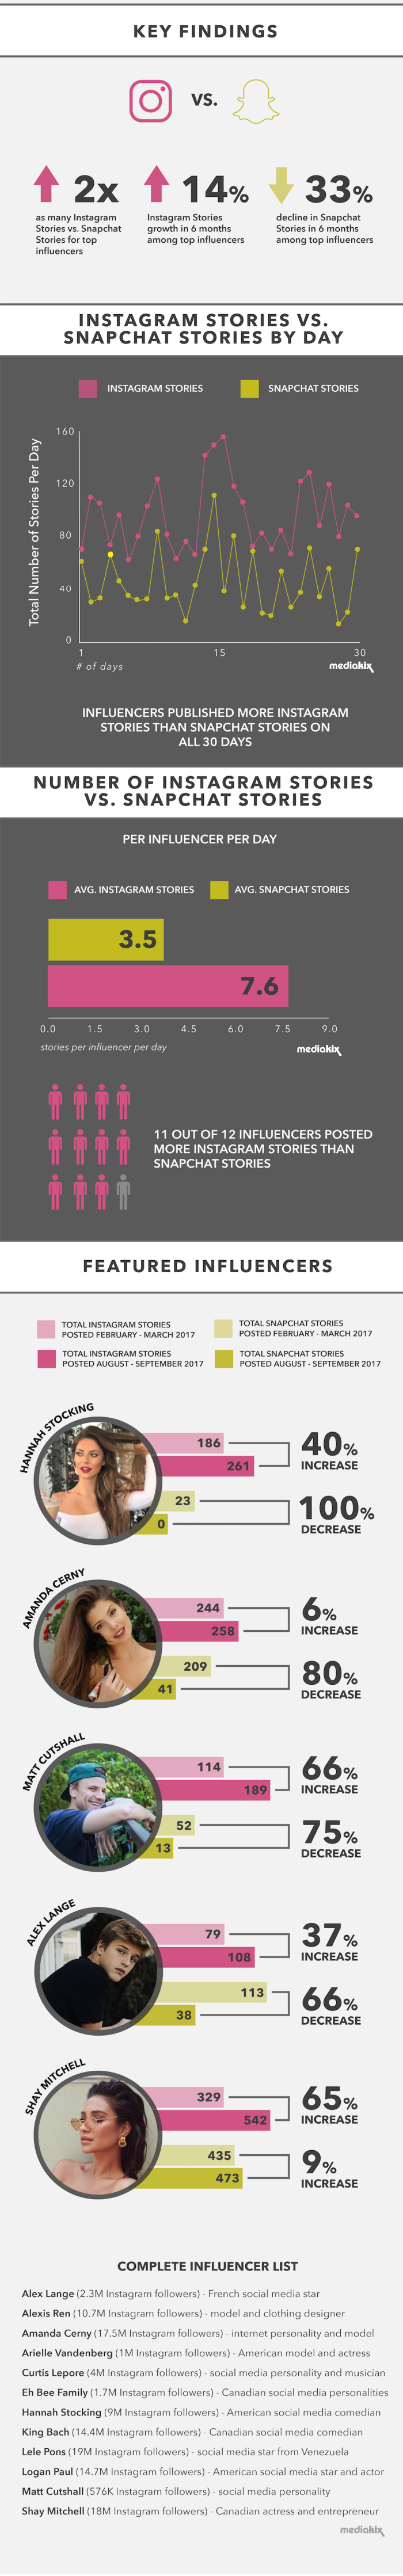 Instagram-Stories-vs-Snapchat-Stories-Top-Influencers-Infographic1